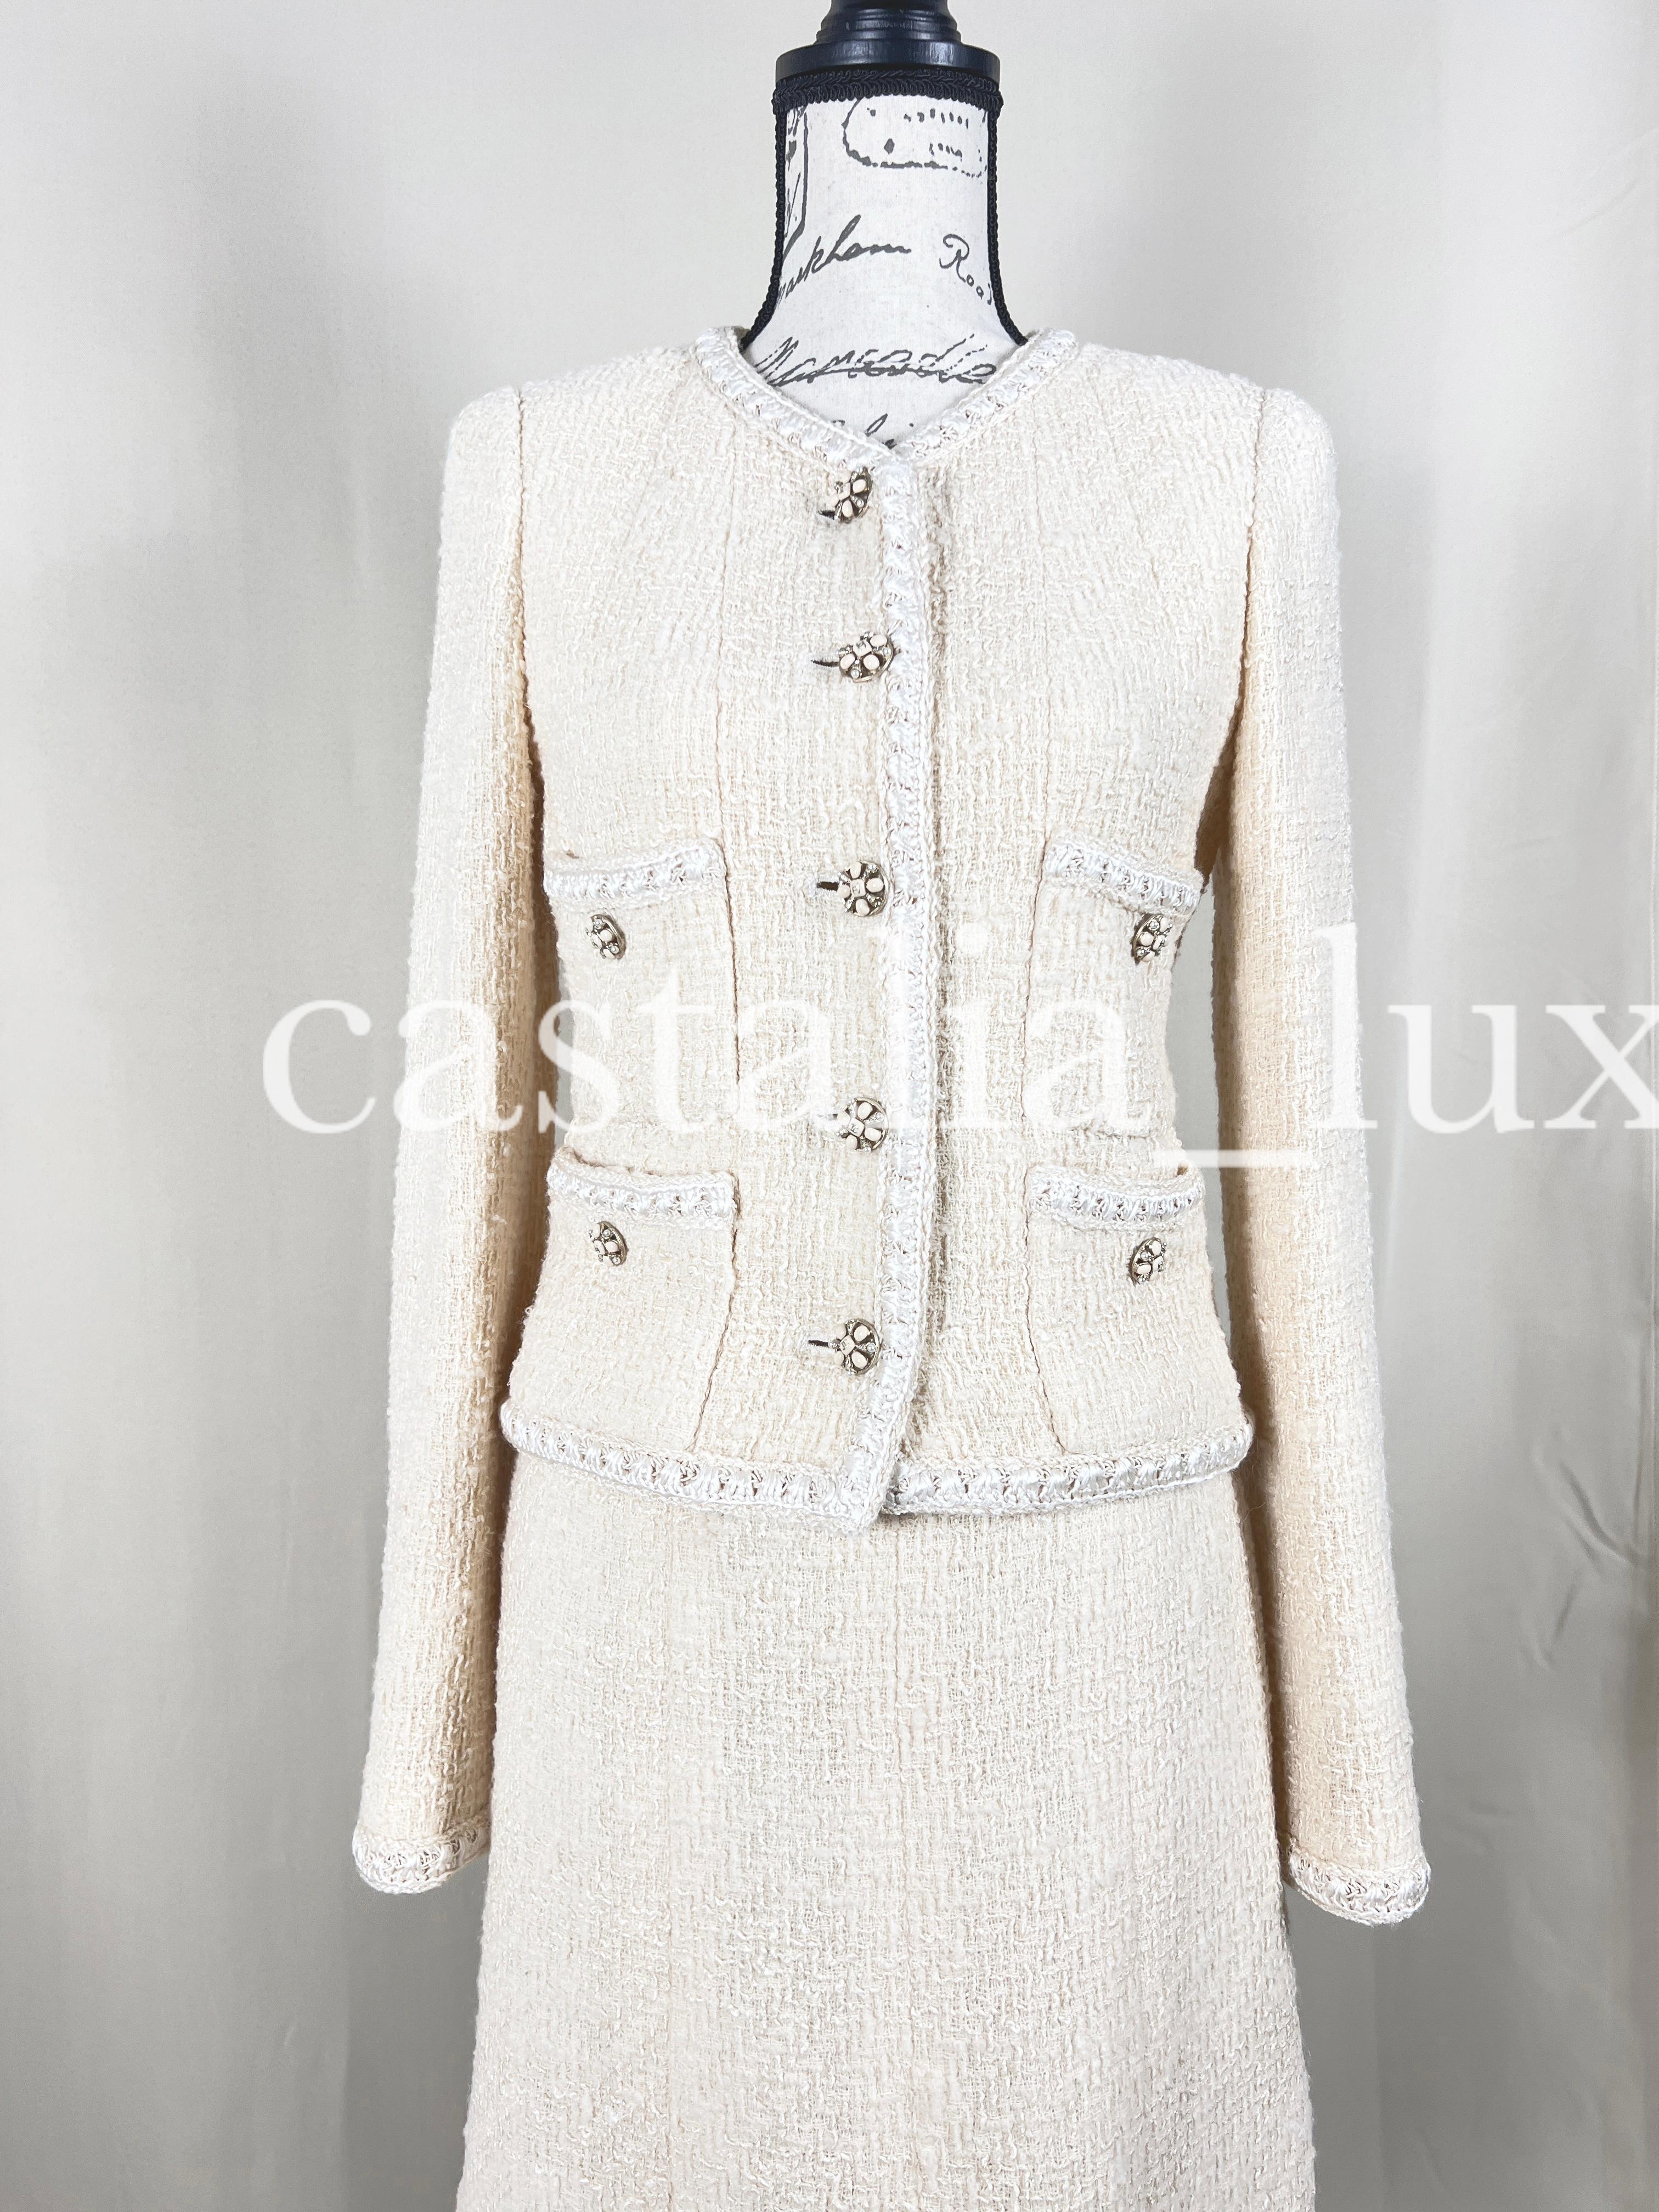 Chanel Iconic New-York Jewel Buttons Tweed Suit 1